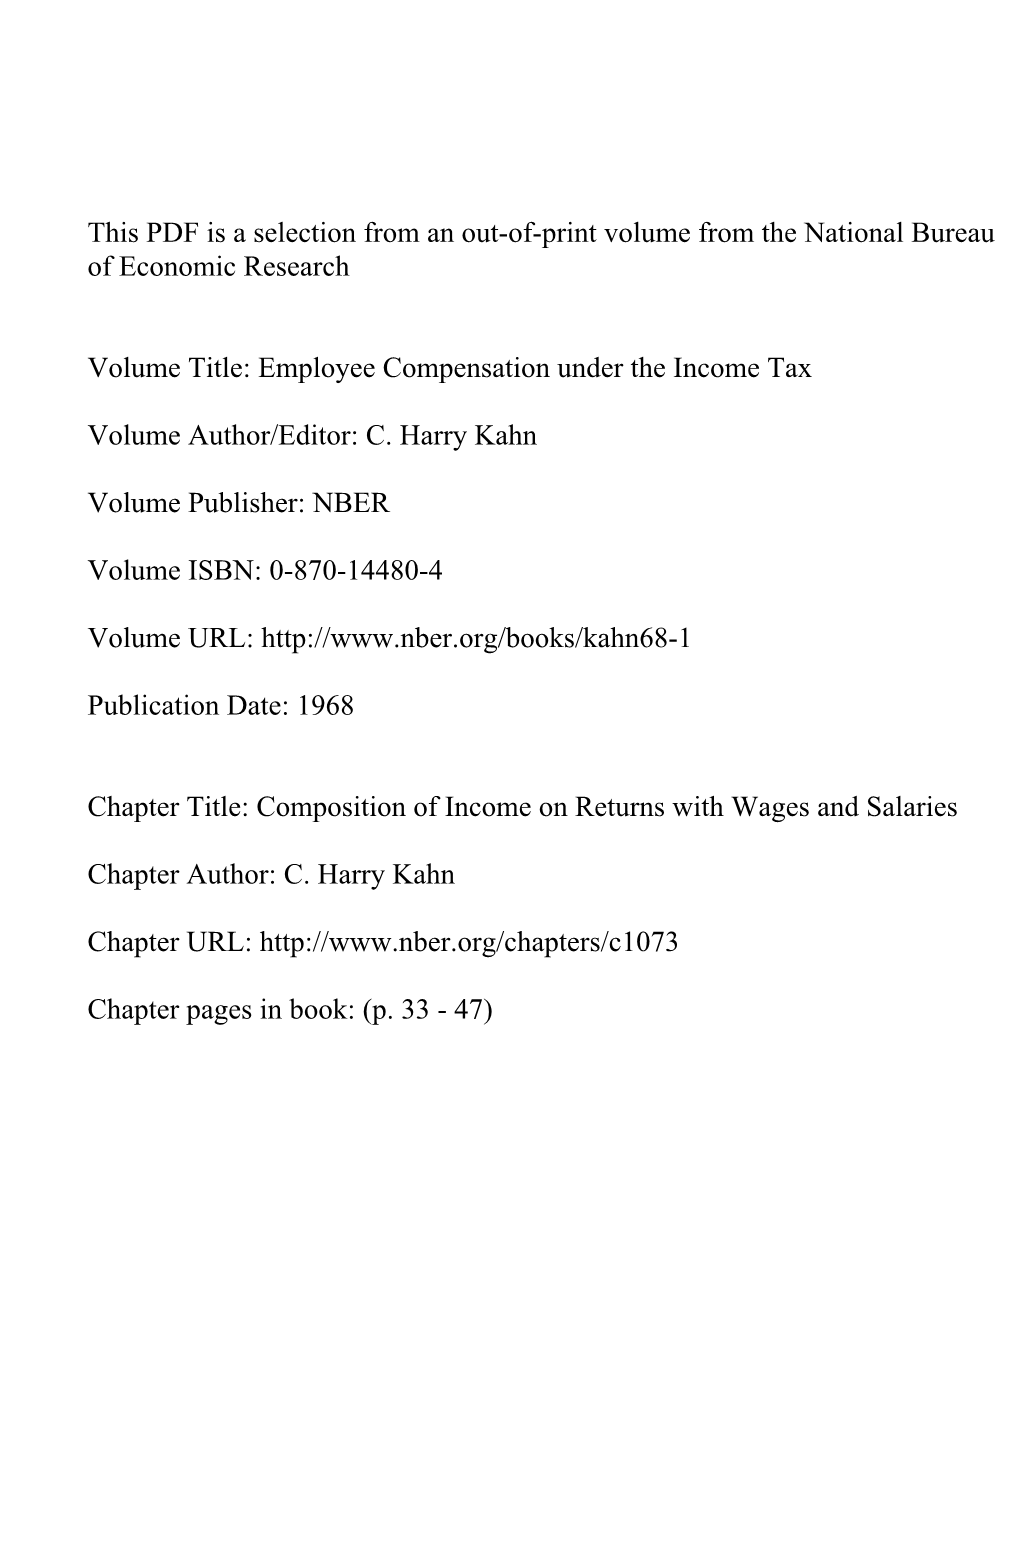 3 Composition of Income on Returns with Wages And